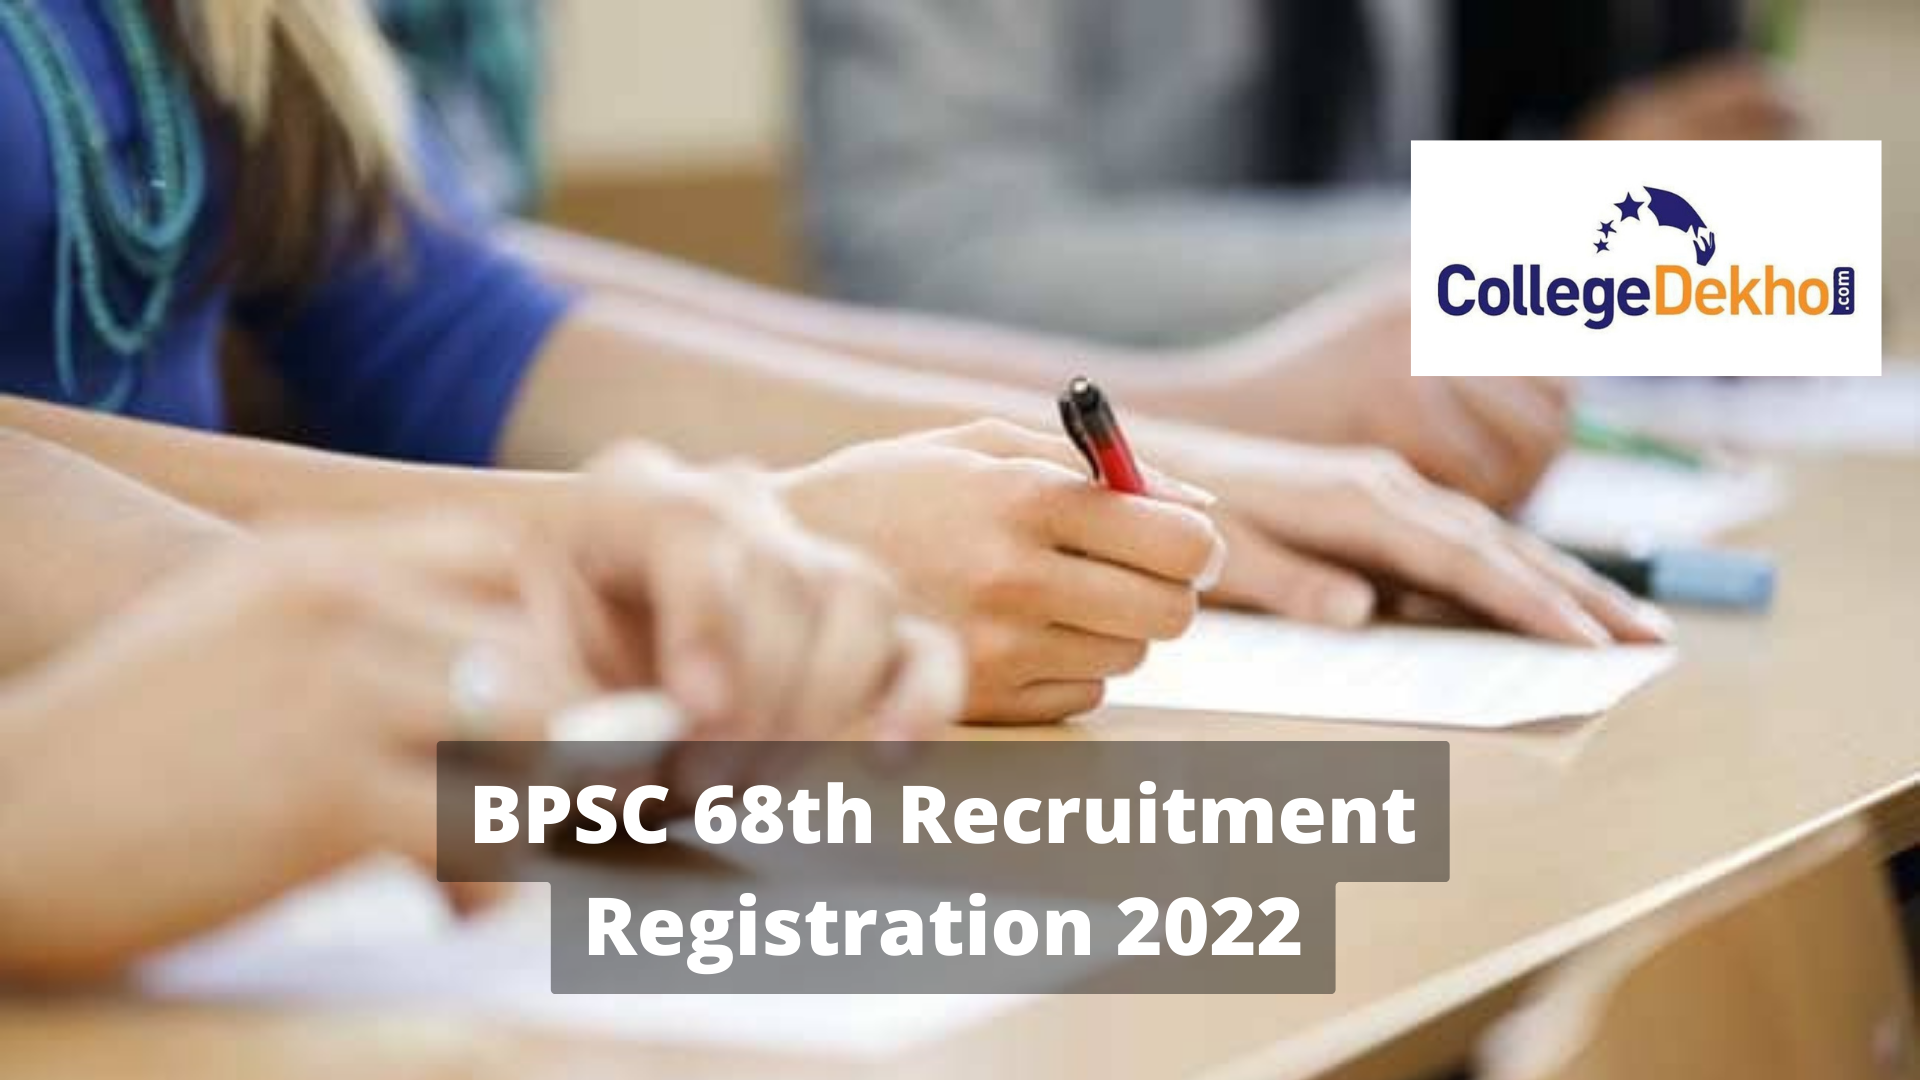 BPSC 68th Recruitment Registration 2022 Started: Direct Link Here to Apply Online